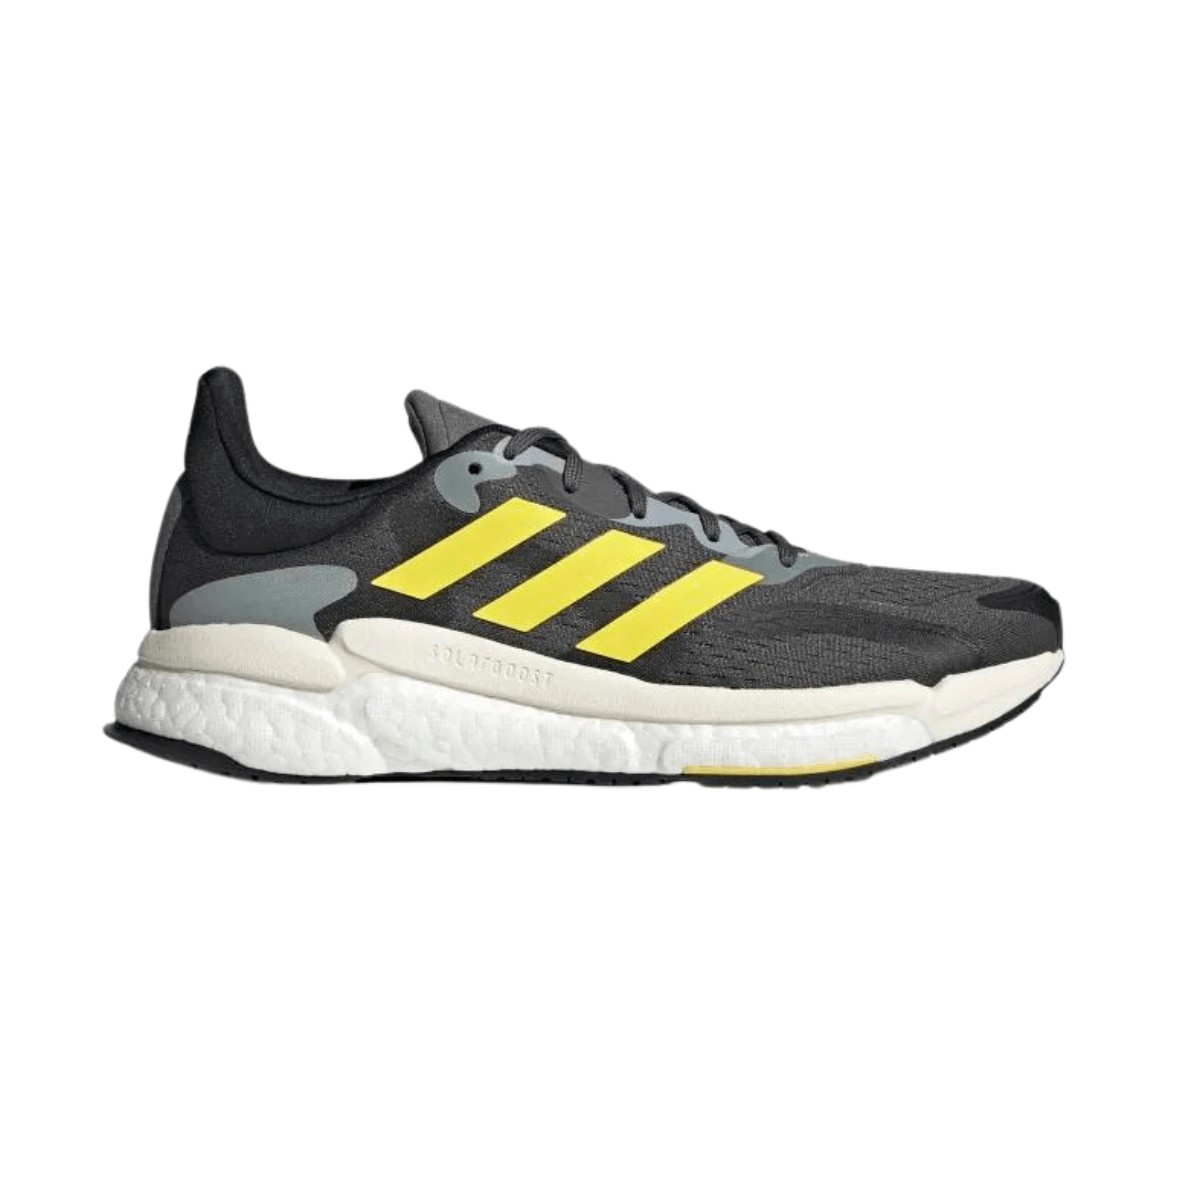 Trainers Adidas Solar Boost 4 Black Yellow AW22, Size UK 8.5